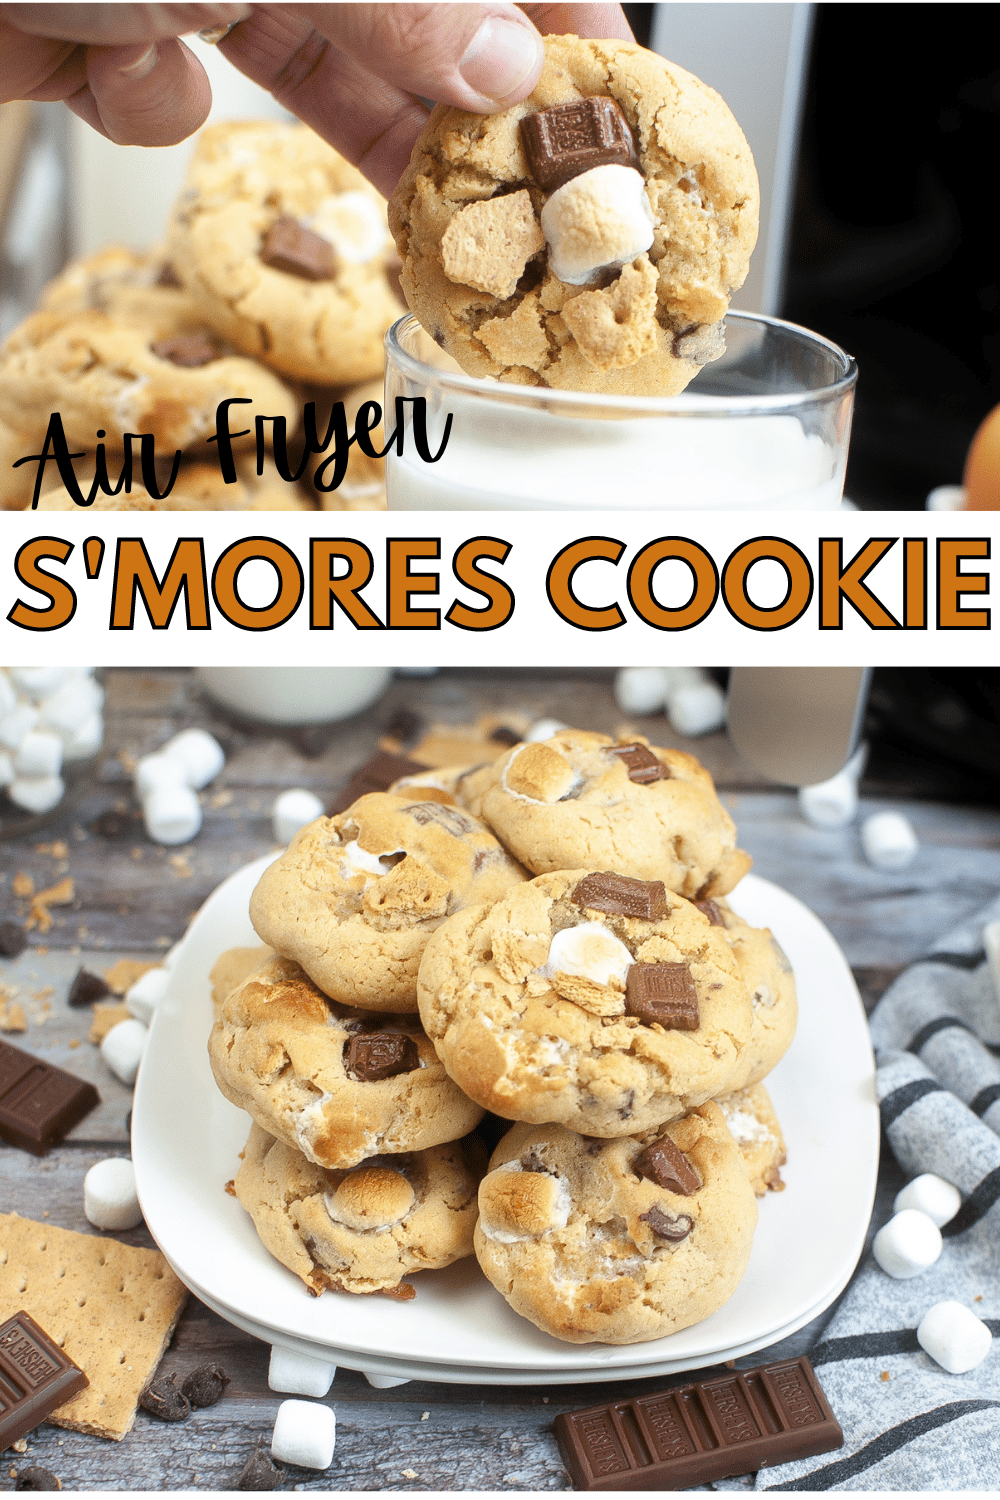 This Air Fryer Smores Cookie recipe is a must-try for anyone who loves smores! It’s an easy recipe that comes together in minutes. #airfryer #smorescookierecipe #airfryersmores #smores via @wondermomwannab